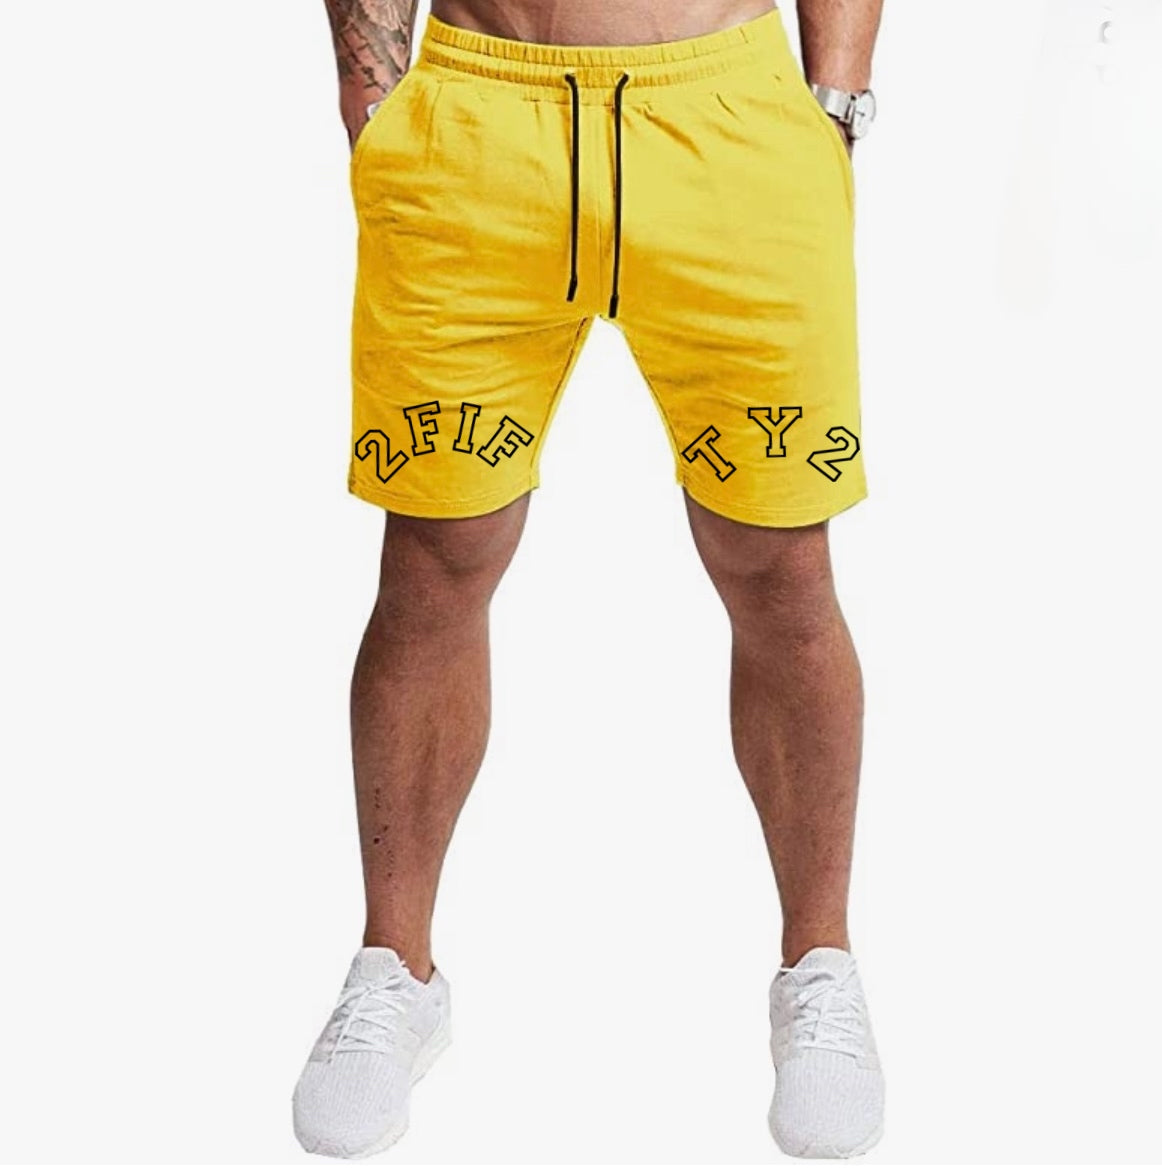 Men’s dry fit cargo shorts